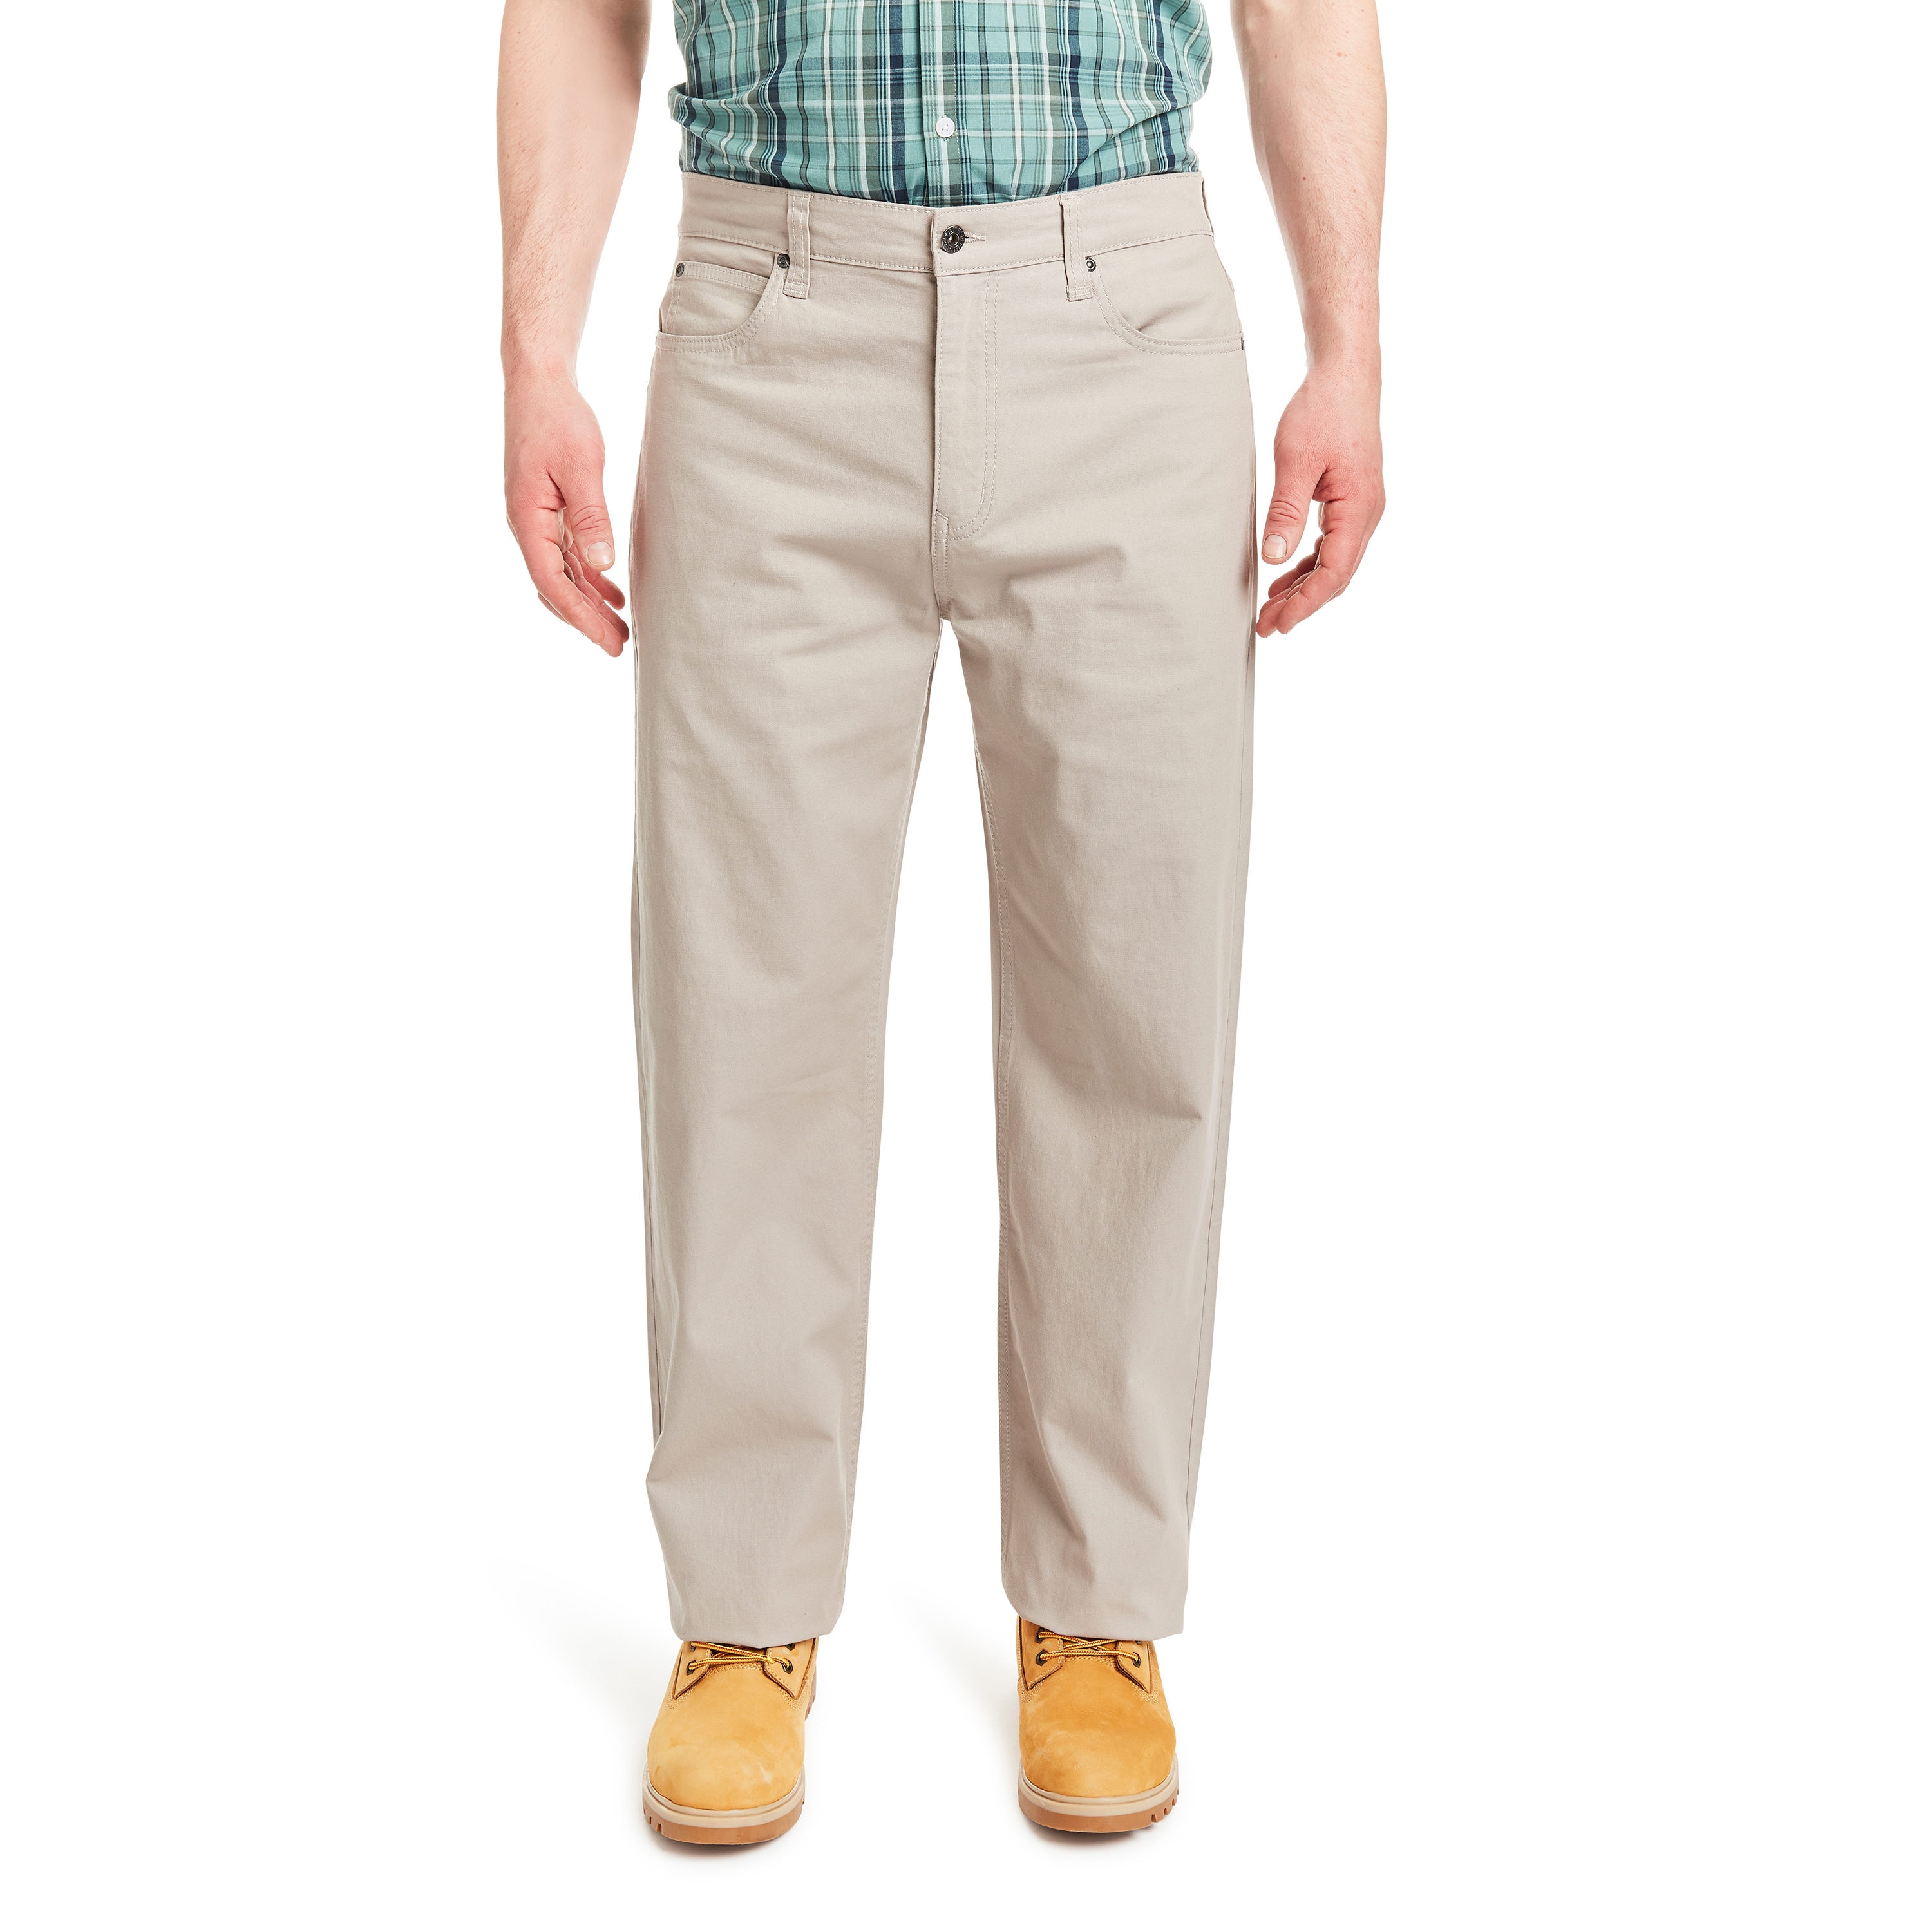 Smith's Workwear Men's Light Stone Canvas Work Pants (40 X 32) in